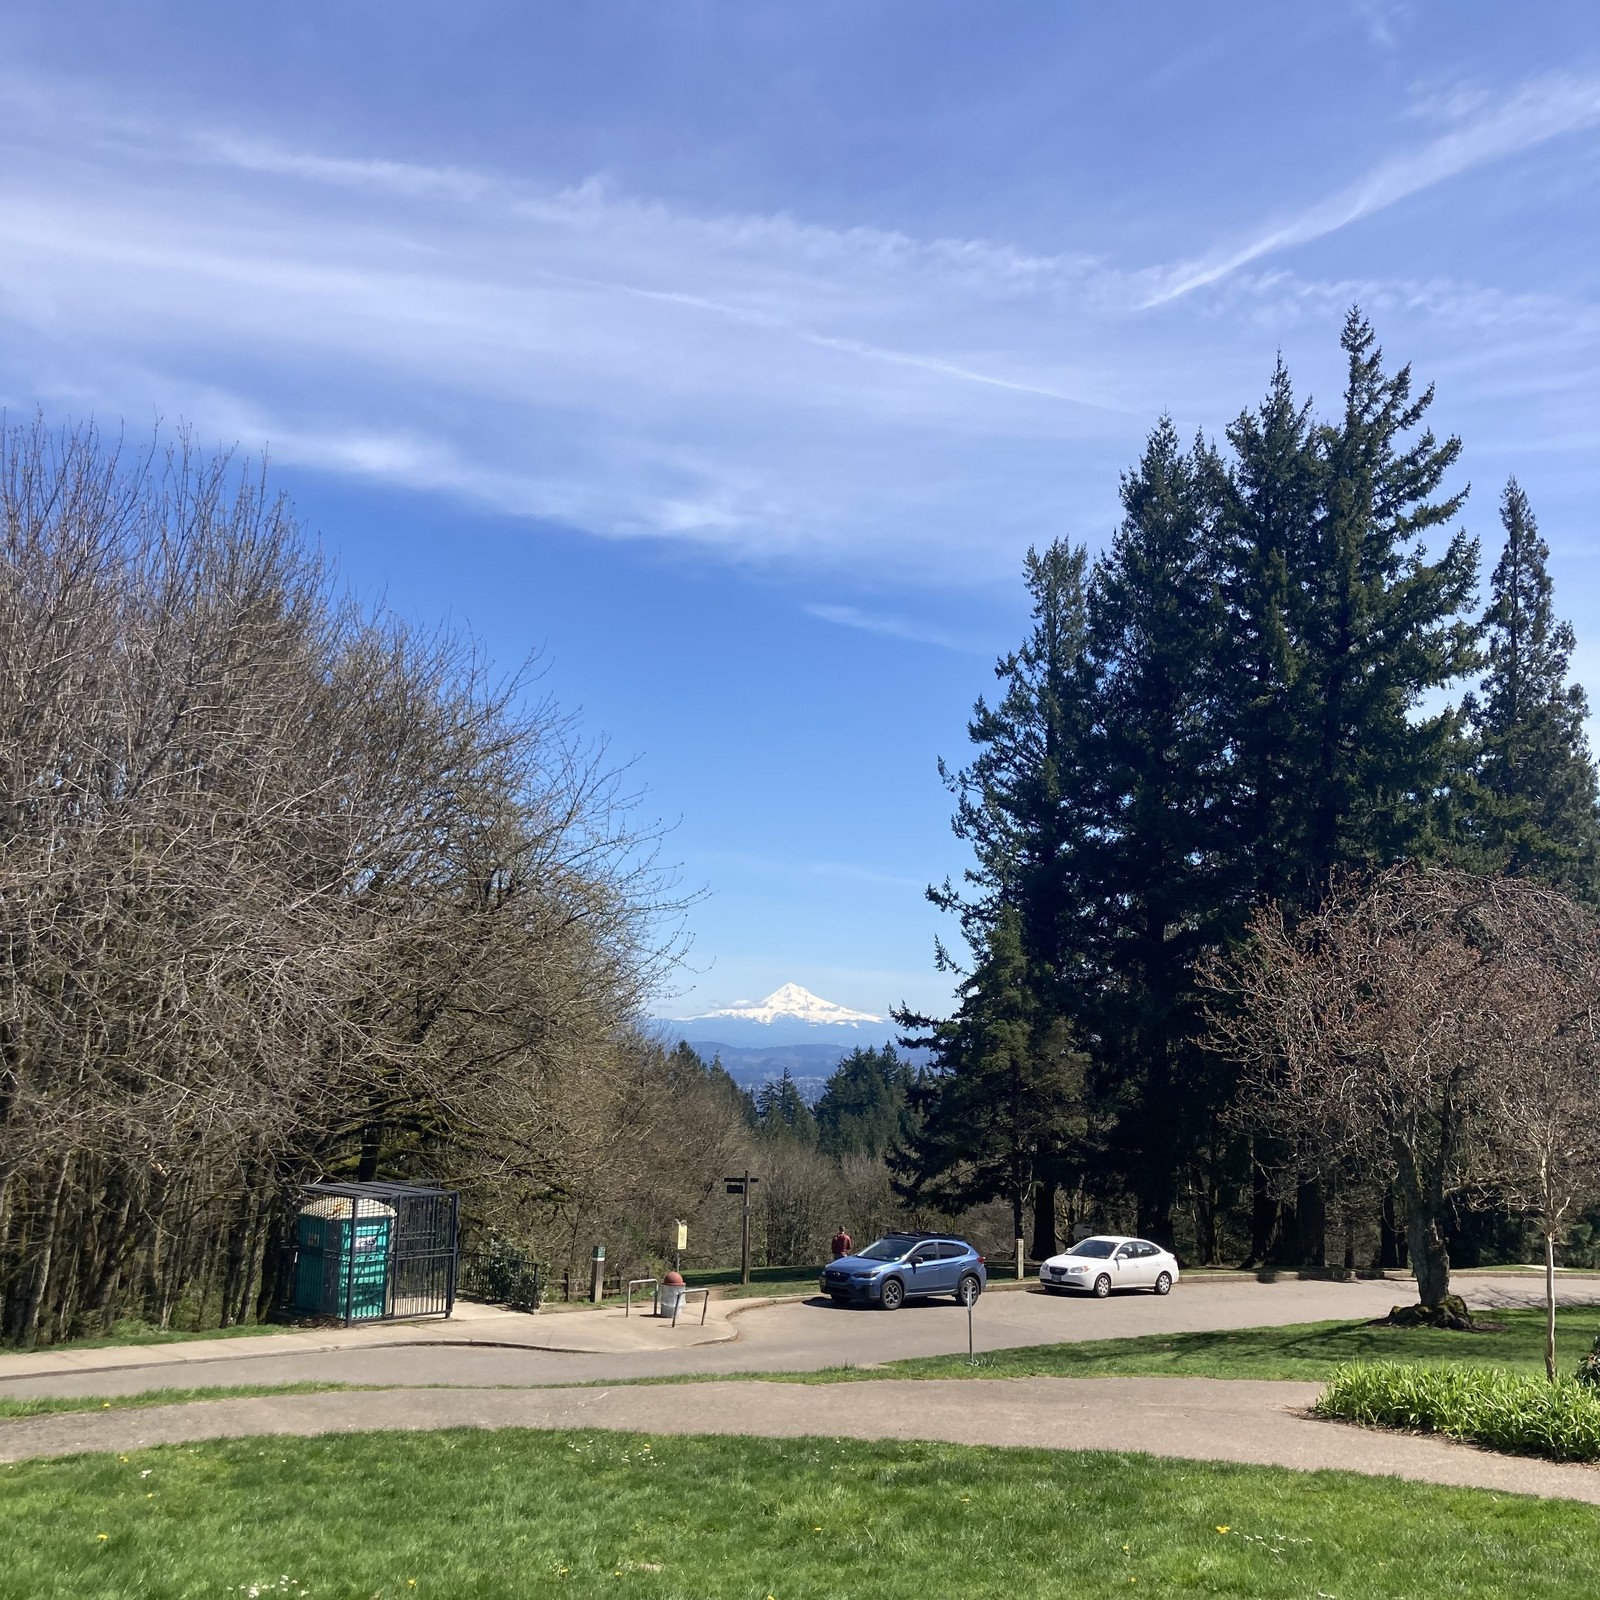 Mt. Hood from Council Crest Park. A sparkling clear day, with a few small clouds low and clinging to the lower limbs of the mountain, which is brilliant with snow. The weather is appropriate for late April but the vegetation is many weeks behind